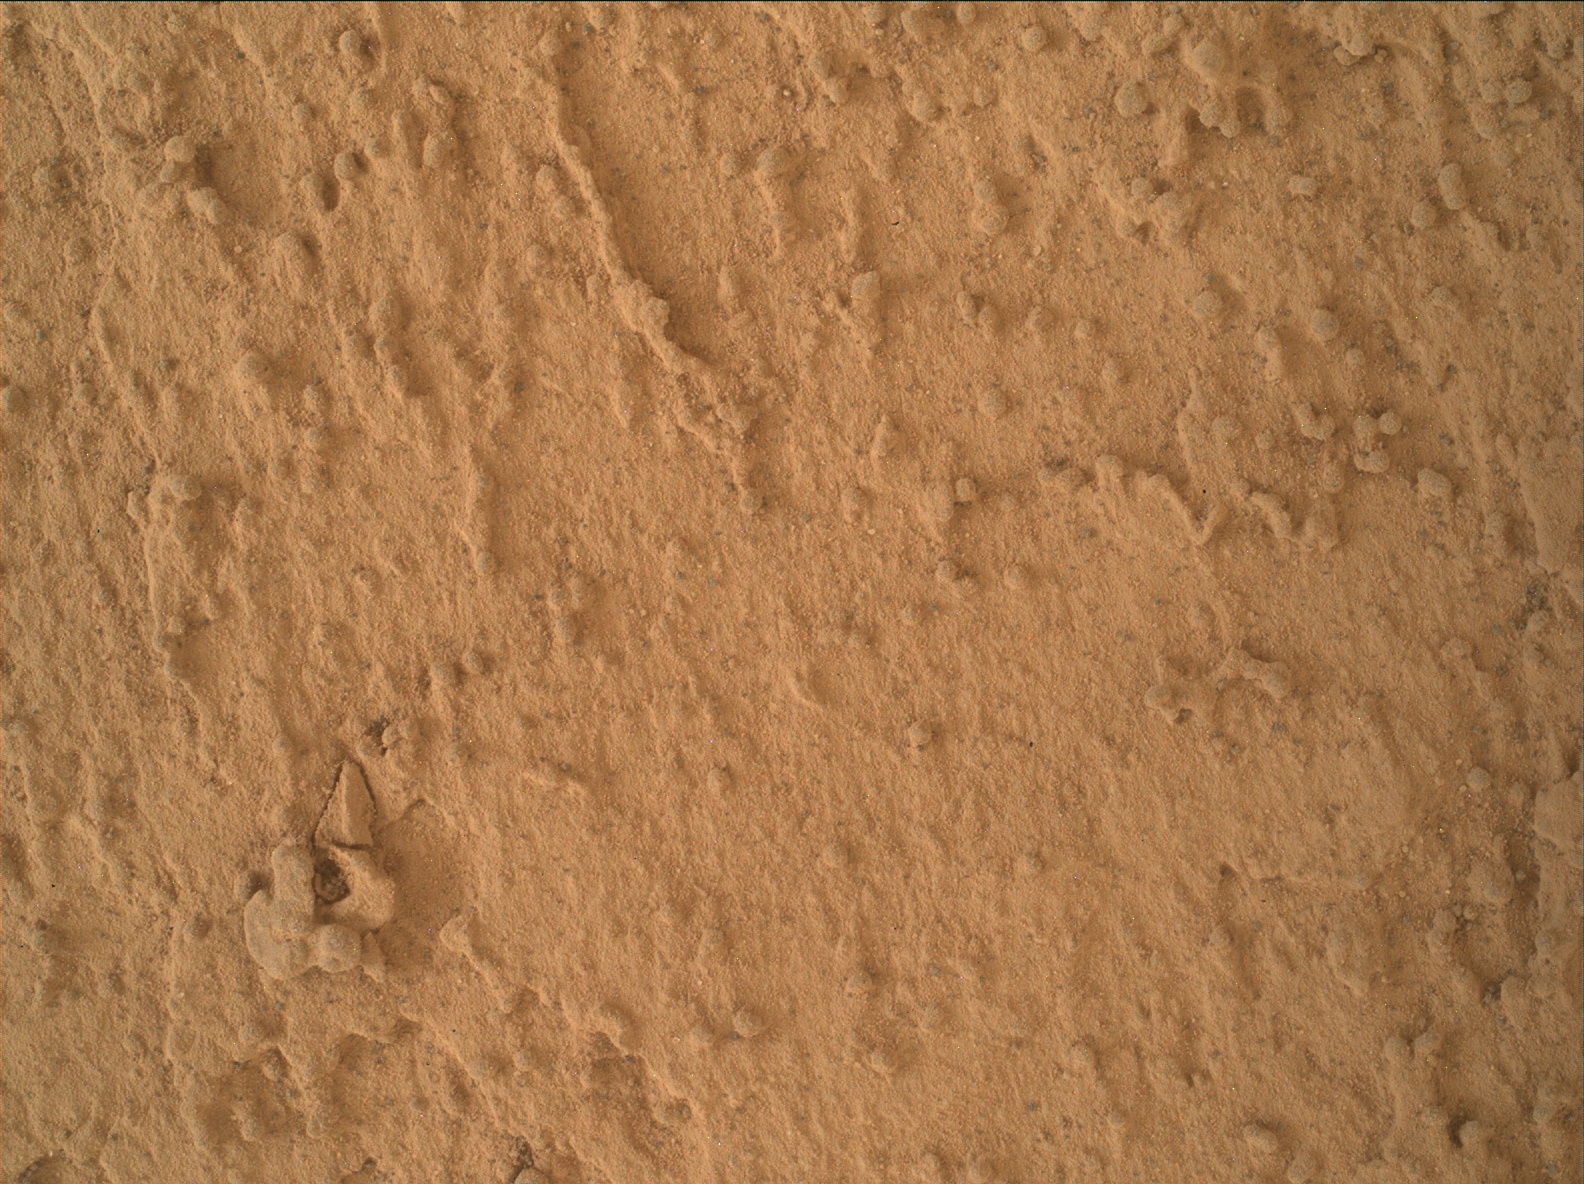 Nasa's Mars rover Curiosity acquired this image using its Mars Hand Lens Imager (MAHLI) on Sol 3466